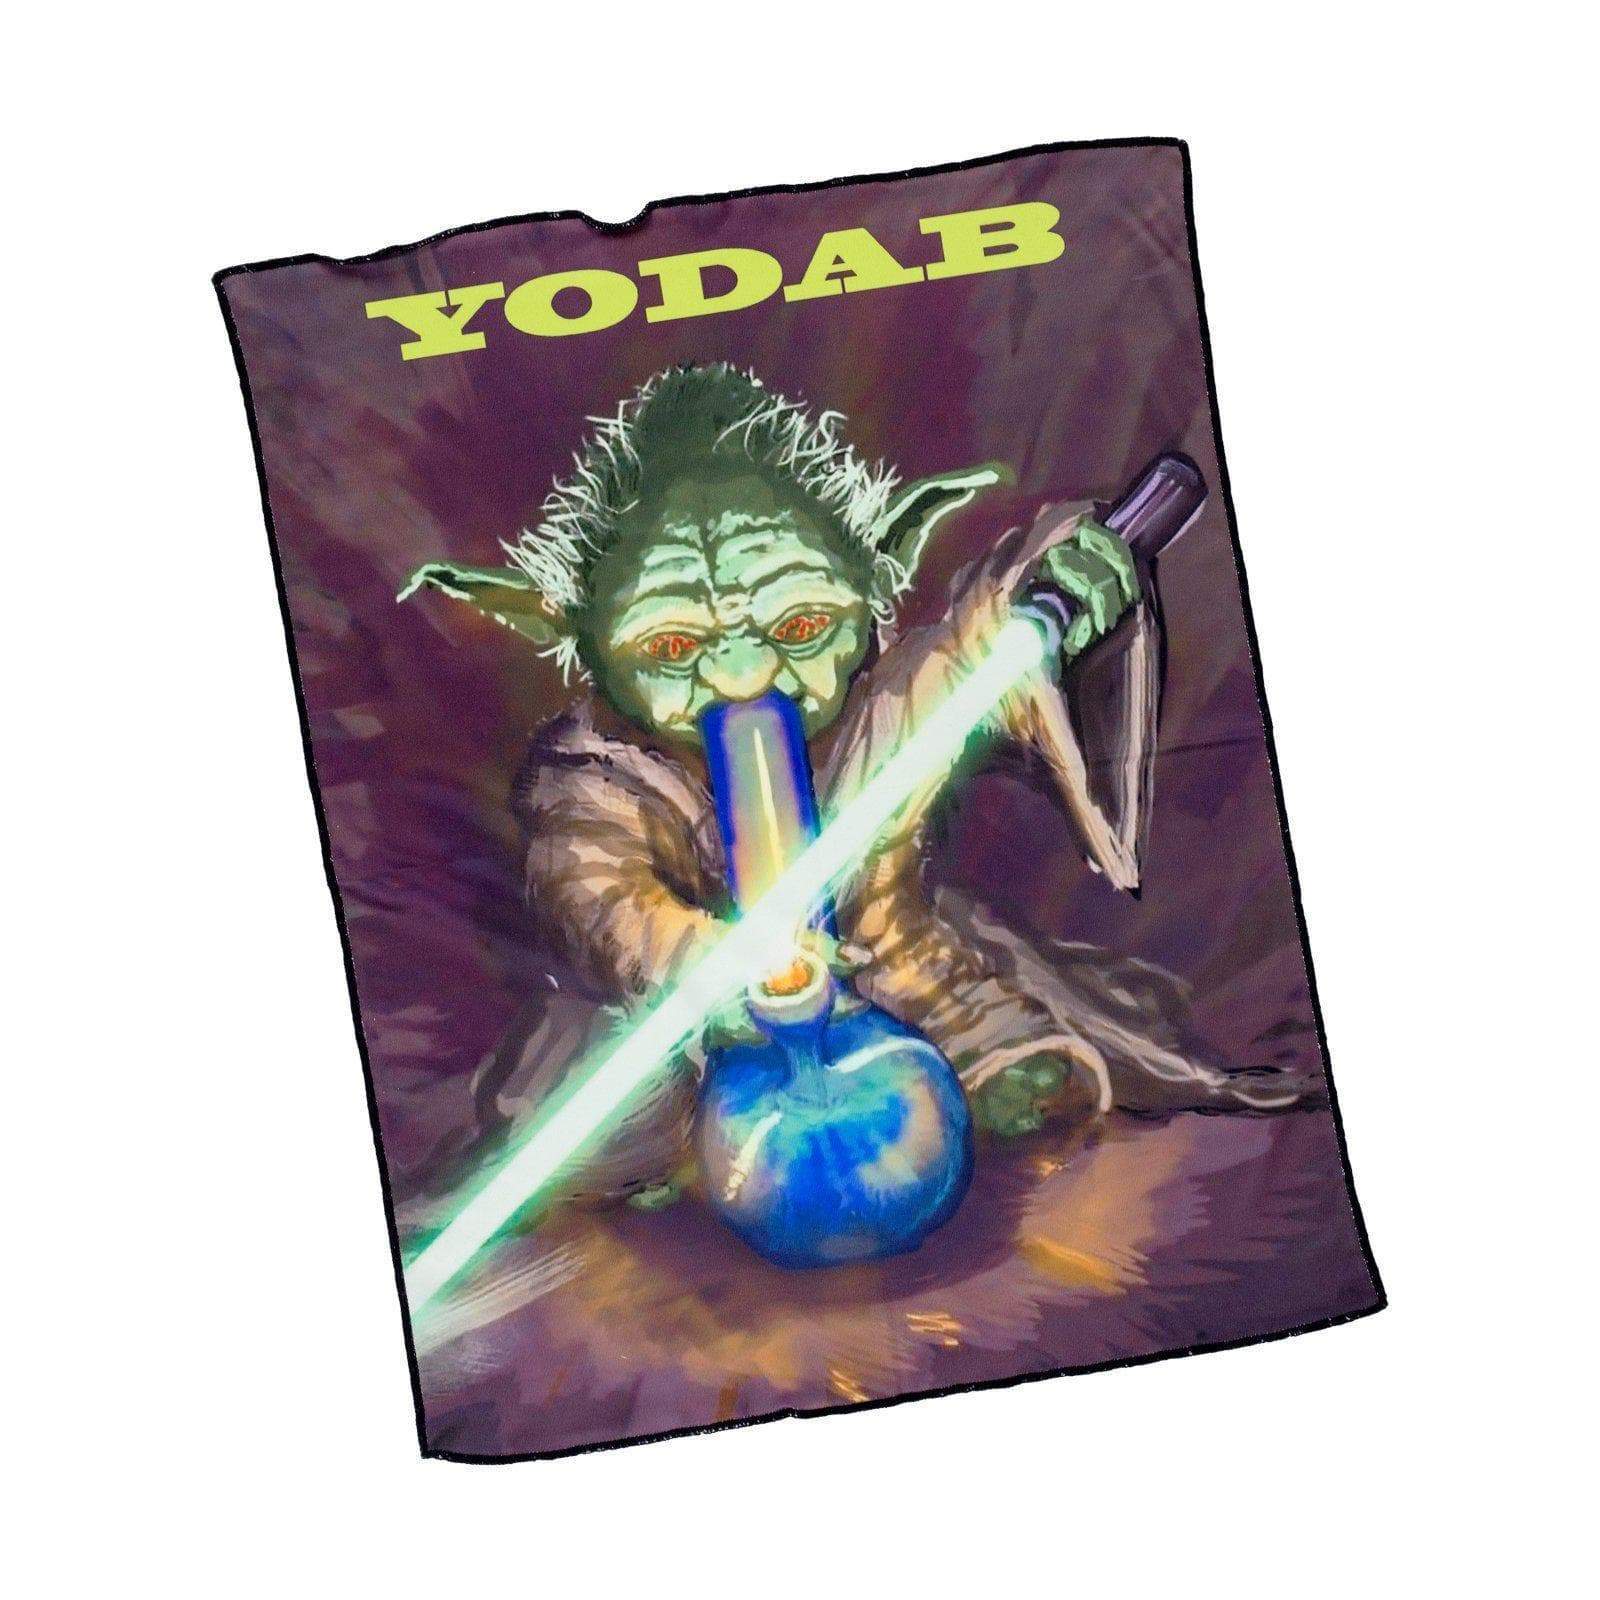 Dab rag cleaning cloth smoking accessory with funny Yoda smoking weed while holding lightsaber design